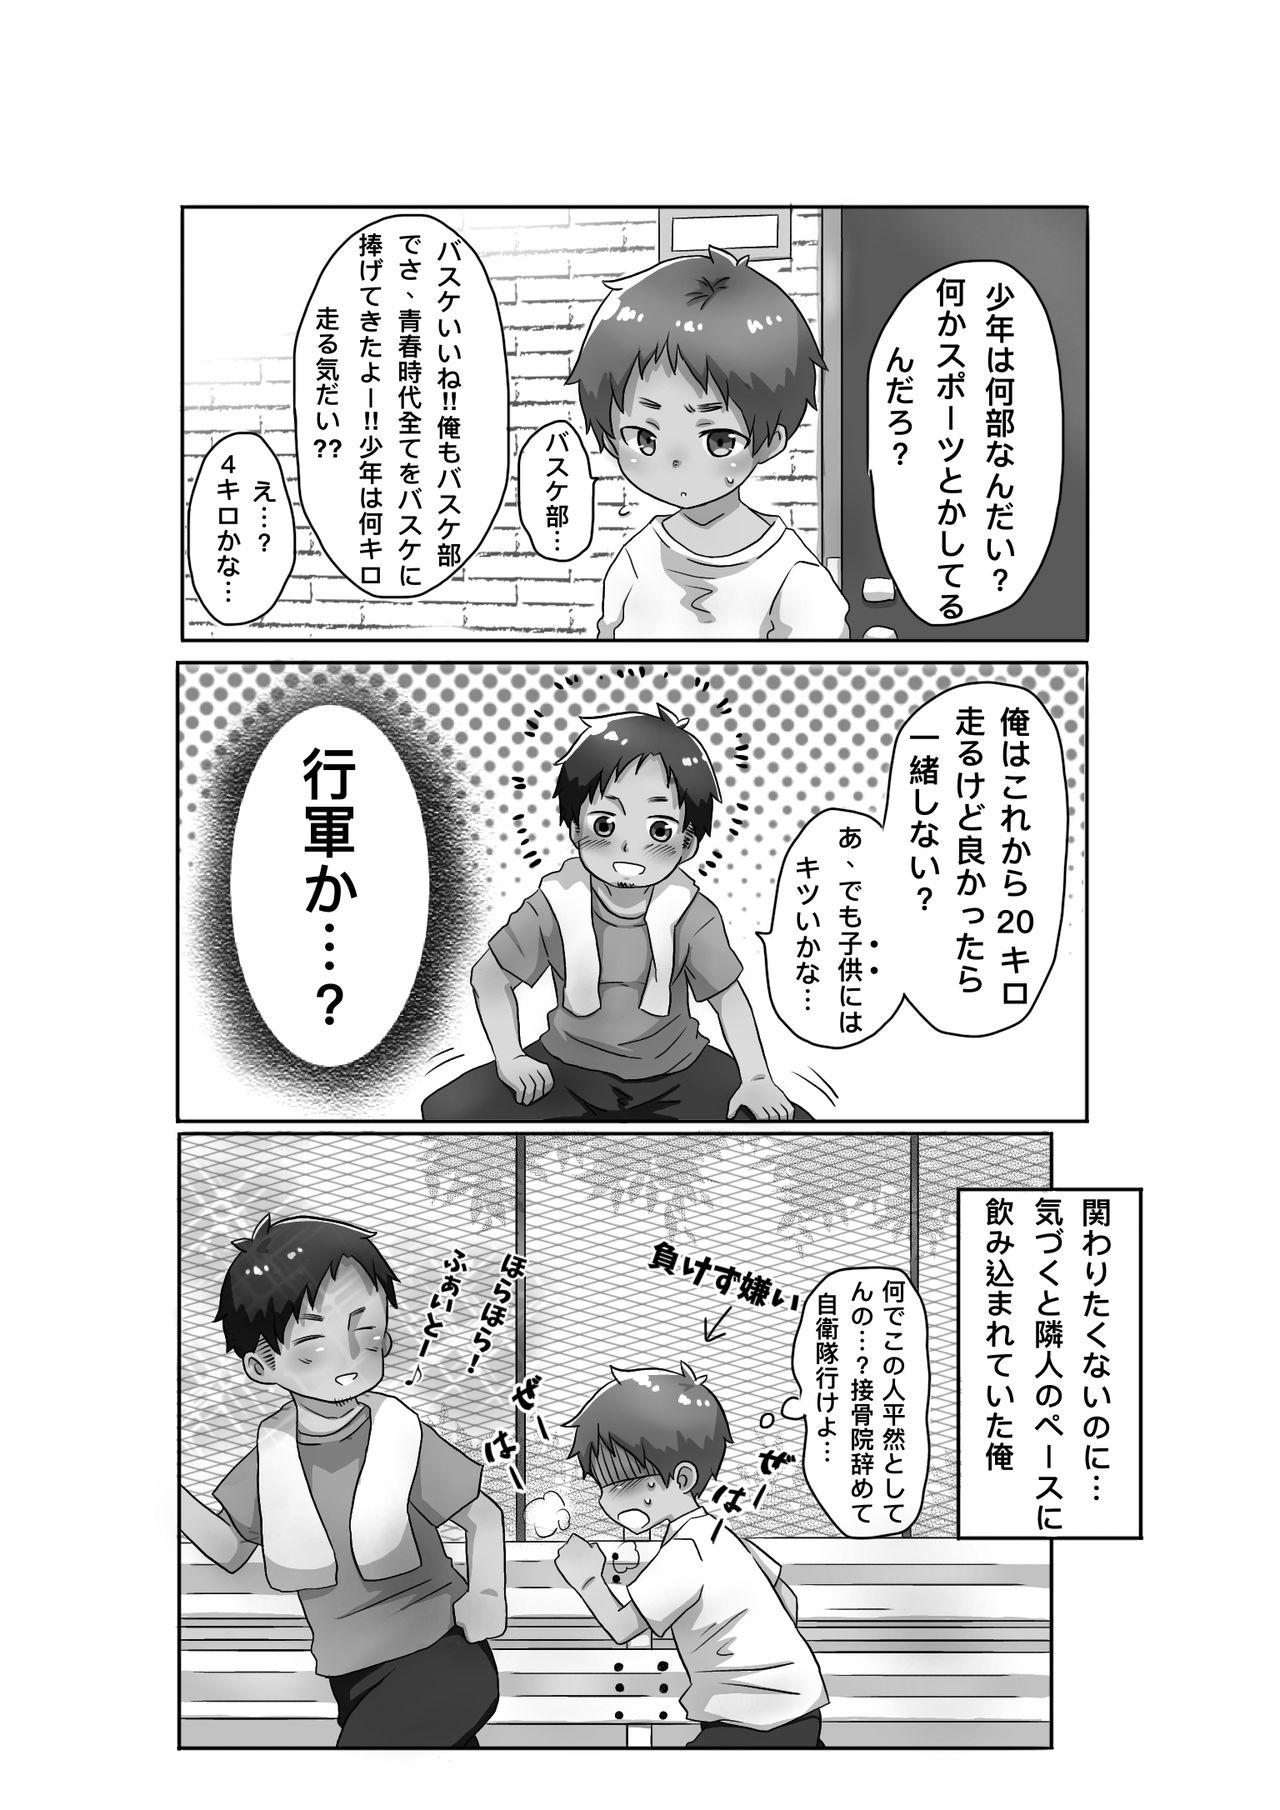 Role Play ゴロタ - 30代独身男と隣りの少年 - Original Muscular - Page 4